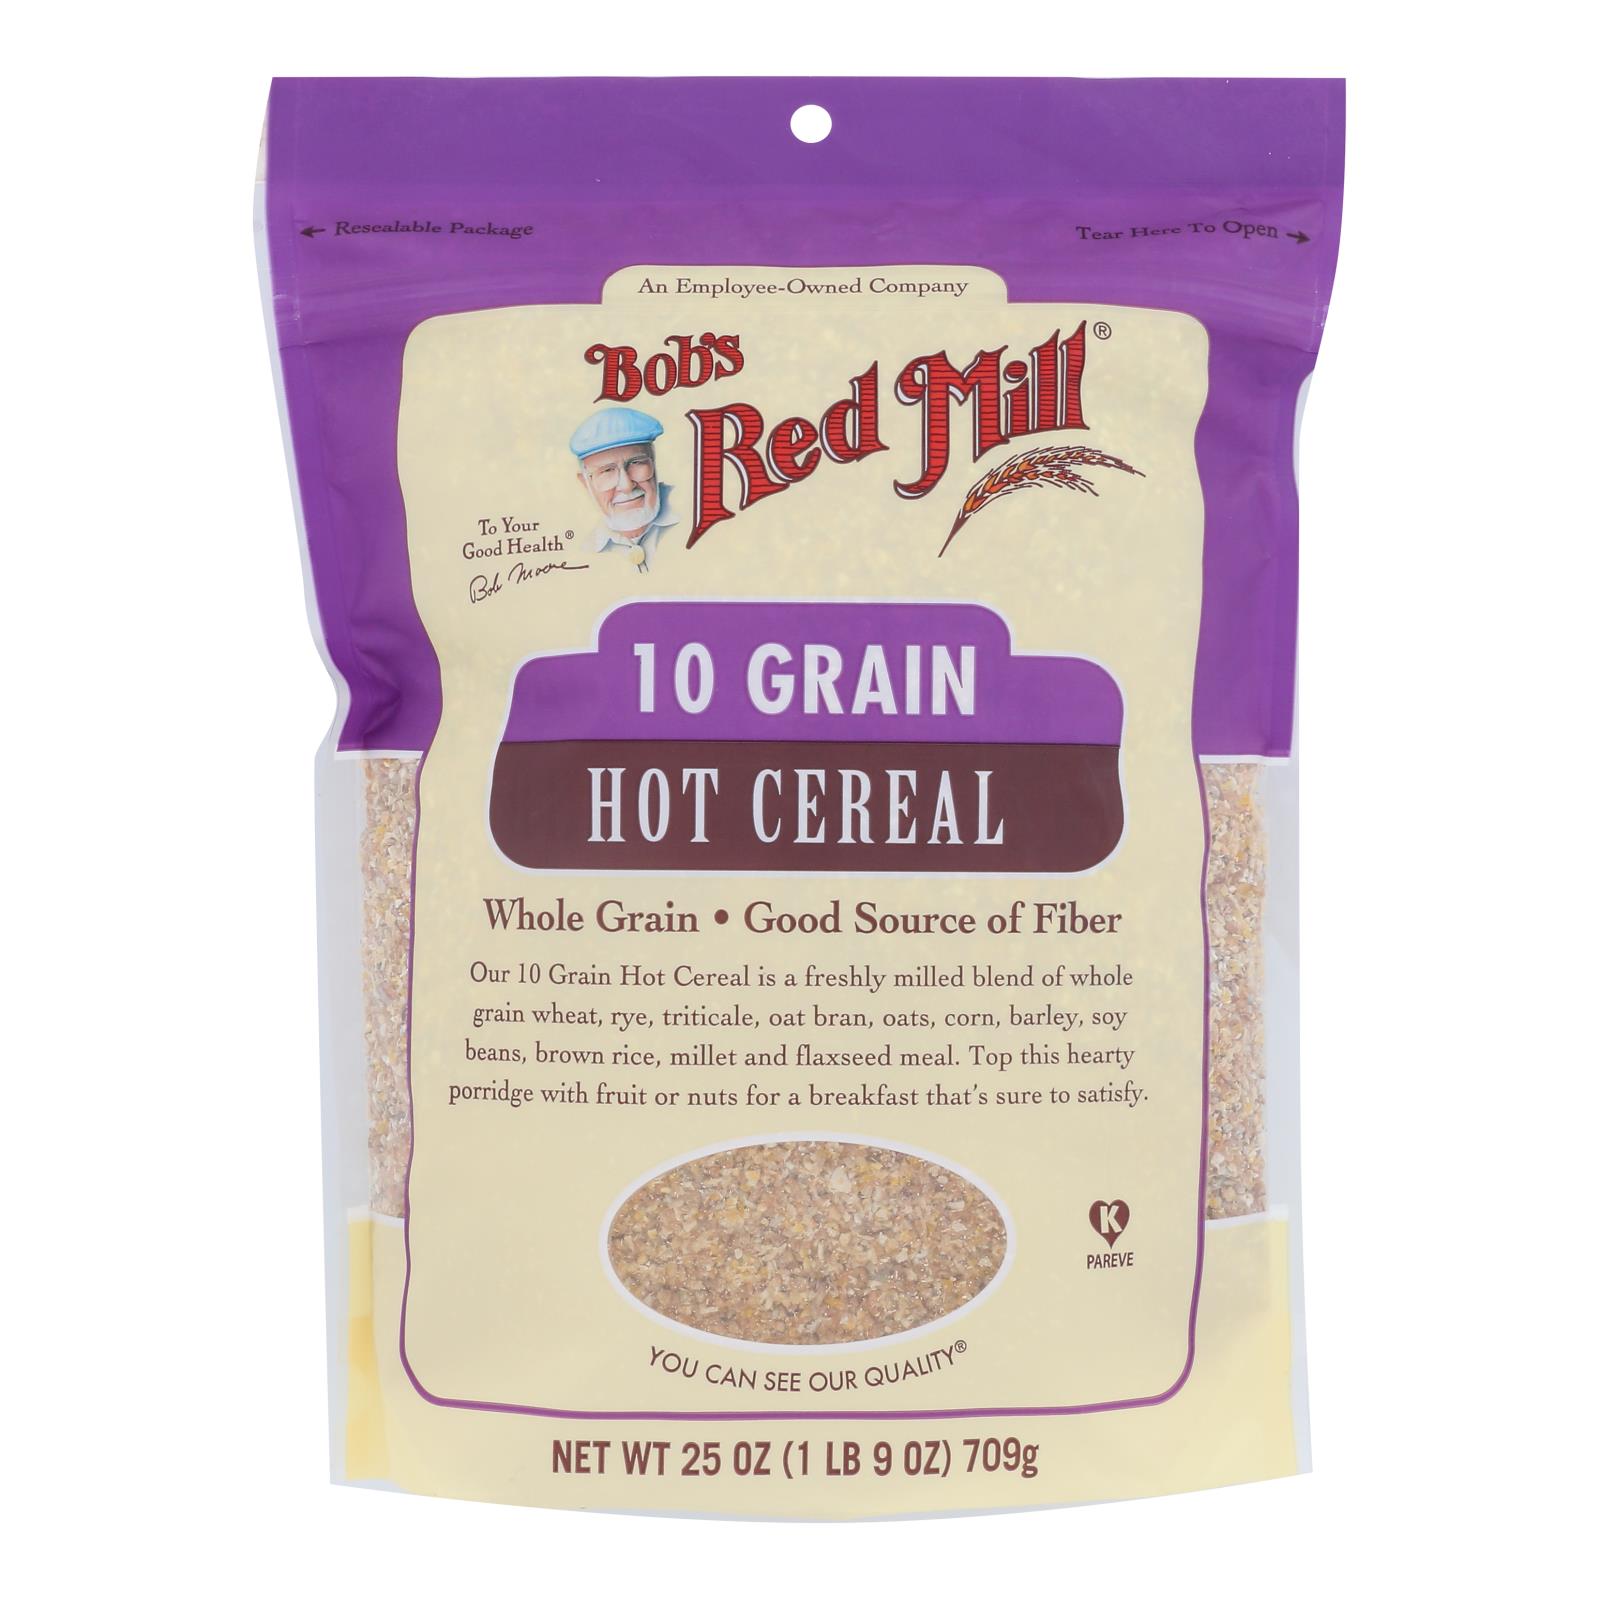 Bob's Red Mill - Cereal 10 Grain - 4개 묶음상품-25 OZ